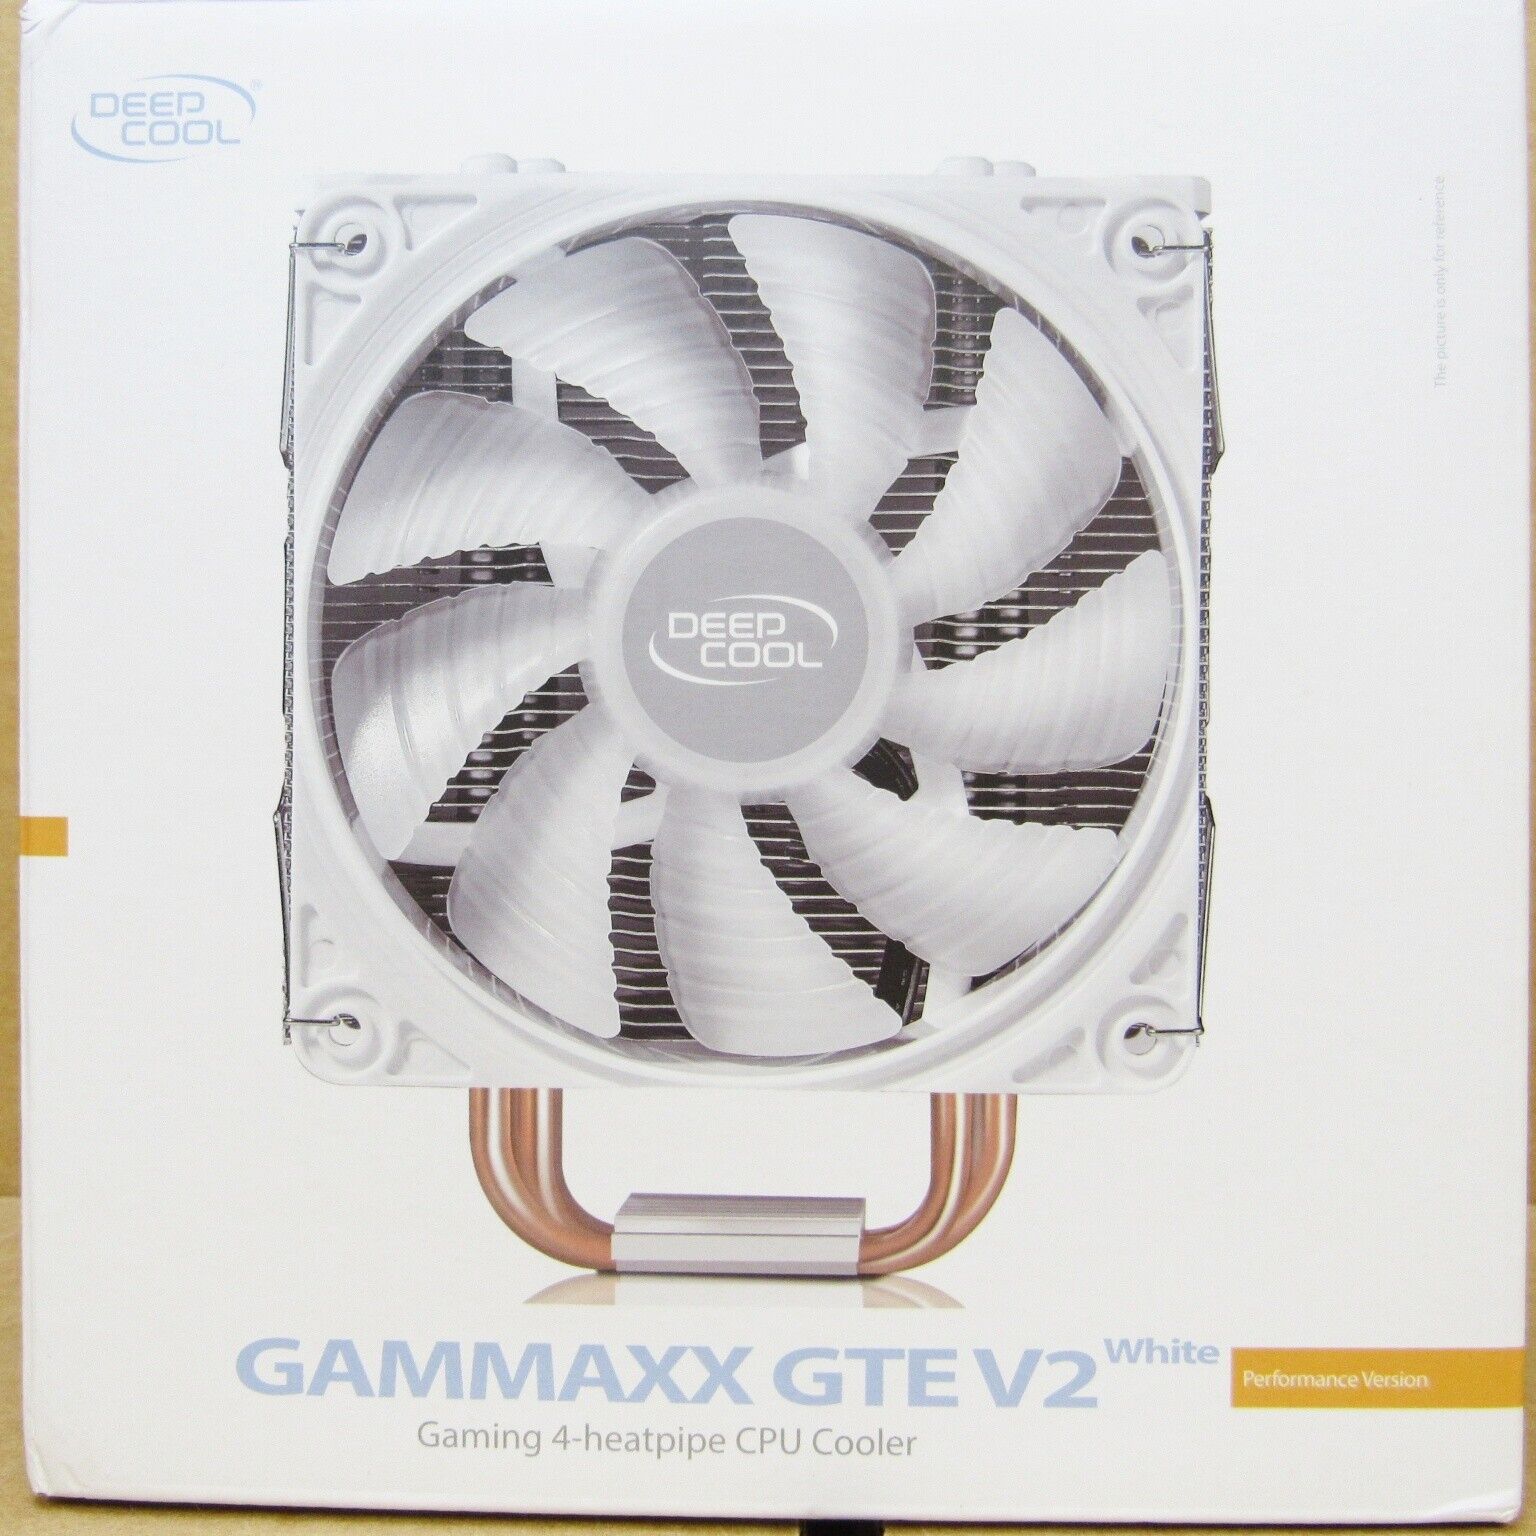 New DeepCool GAMMAXX GTE V2 (White Version) CPU Cooler (New-In-The-Box Unit)